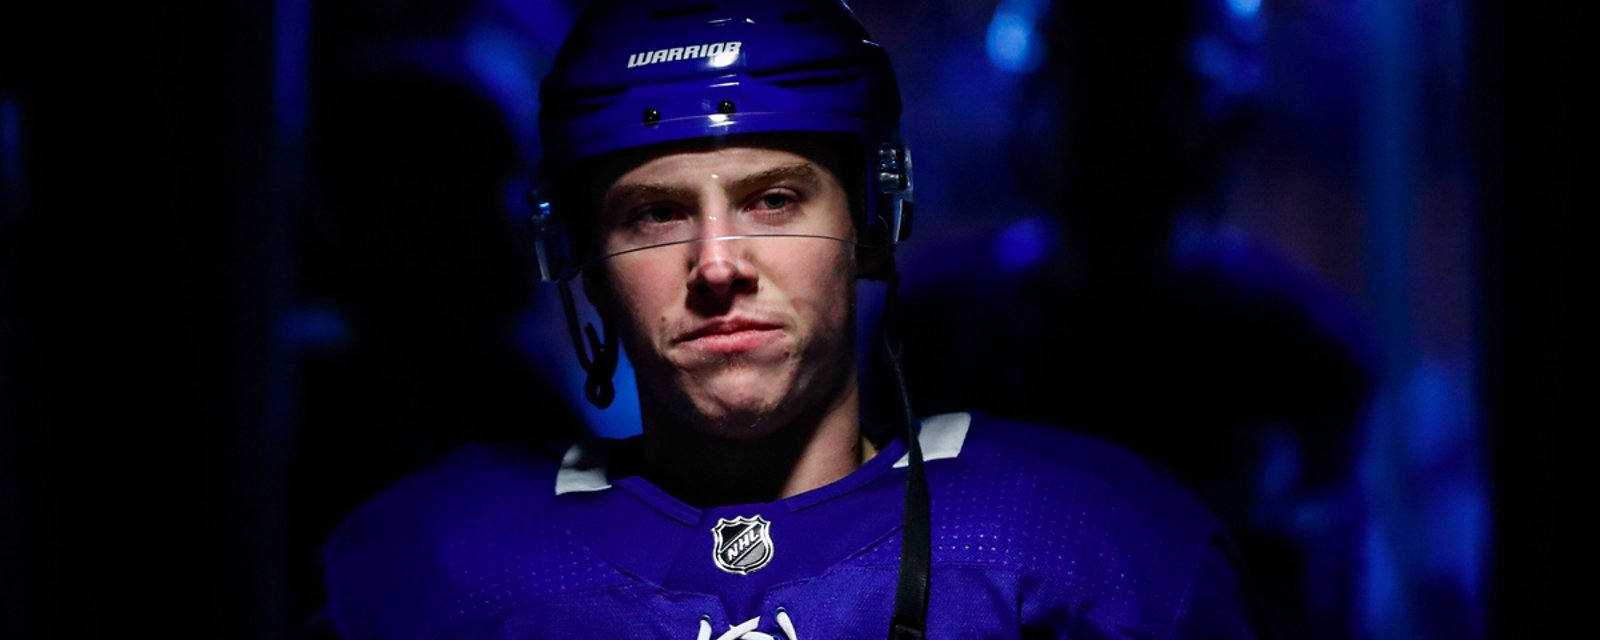 Report: Marner the first RFA to meet with other teams since Shea Weber in 2012